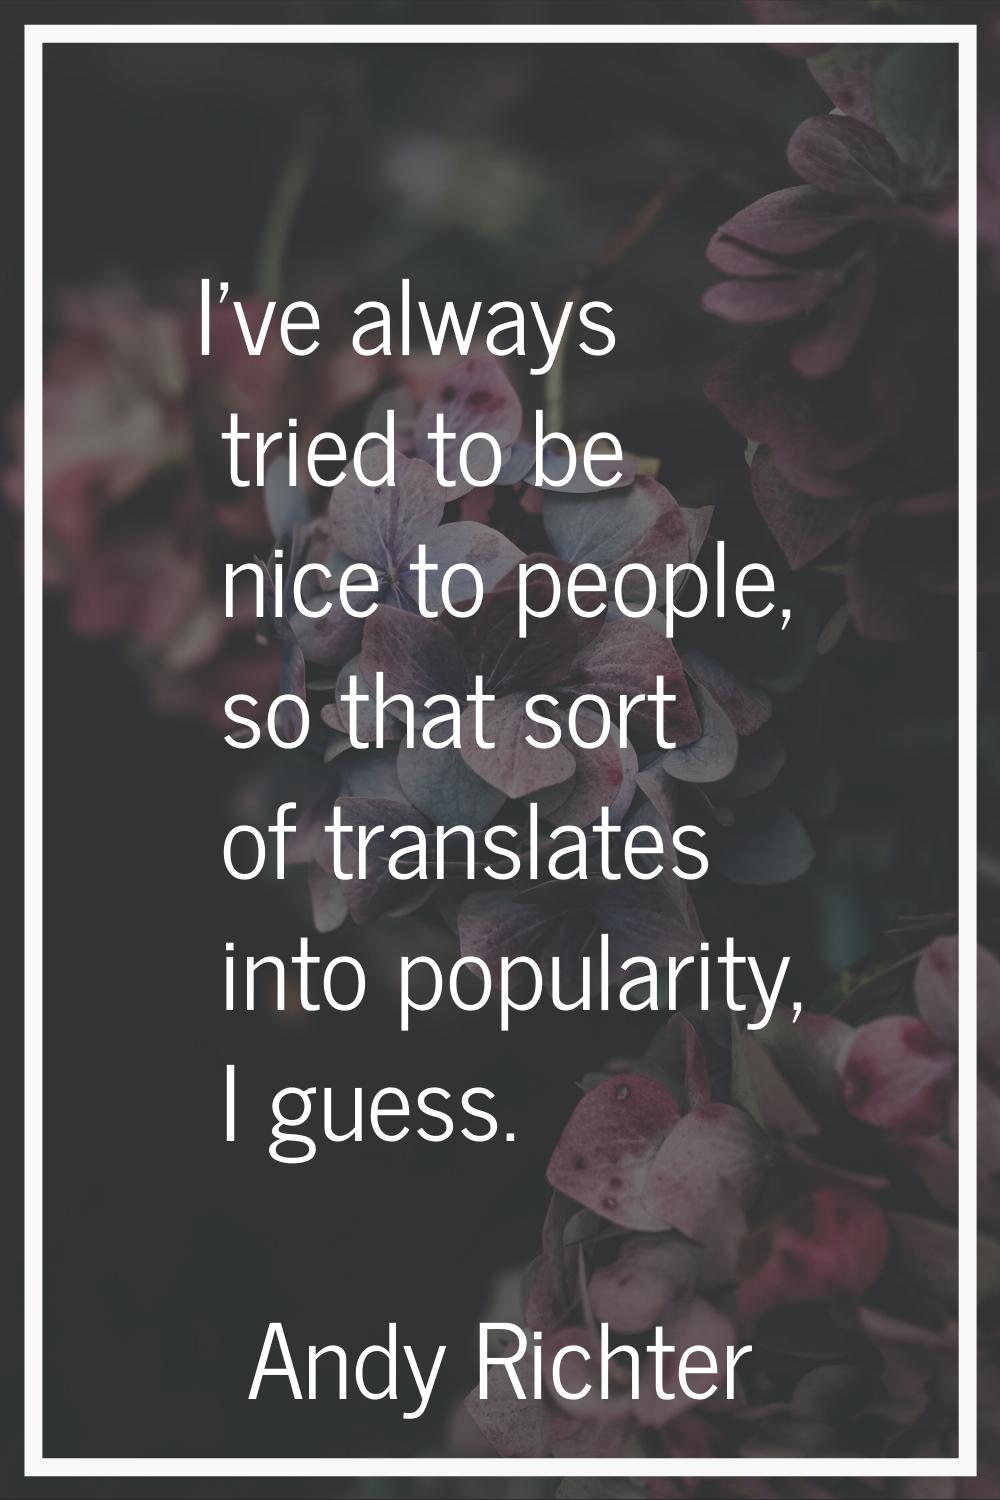 I've always tried to be nice to people, so that sort of translates into popularity, I guess.